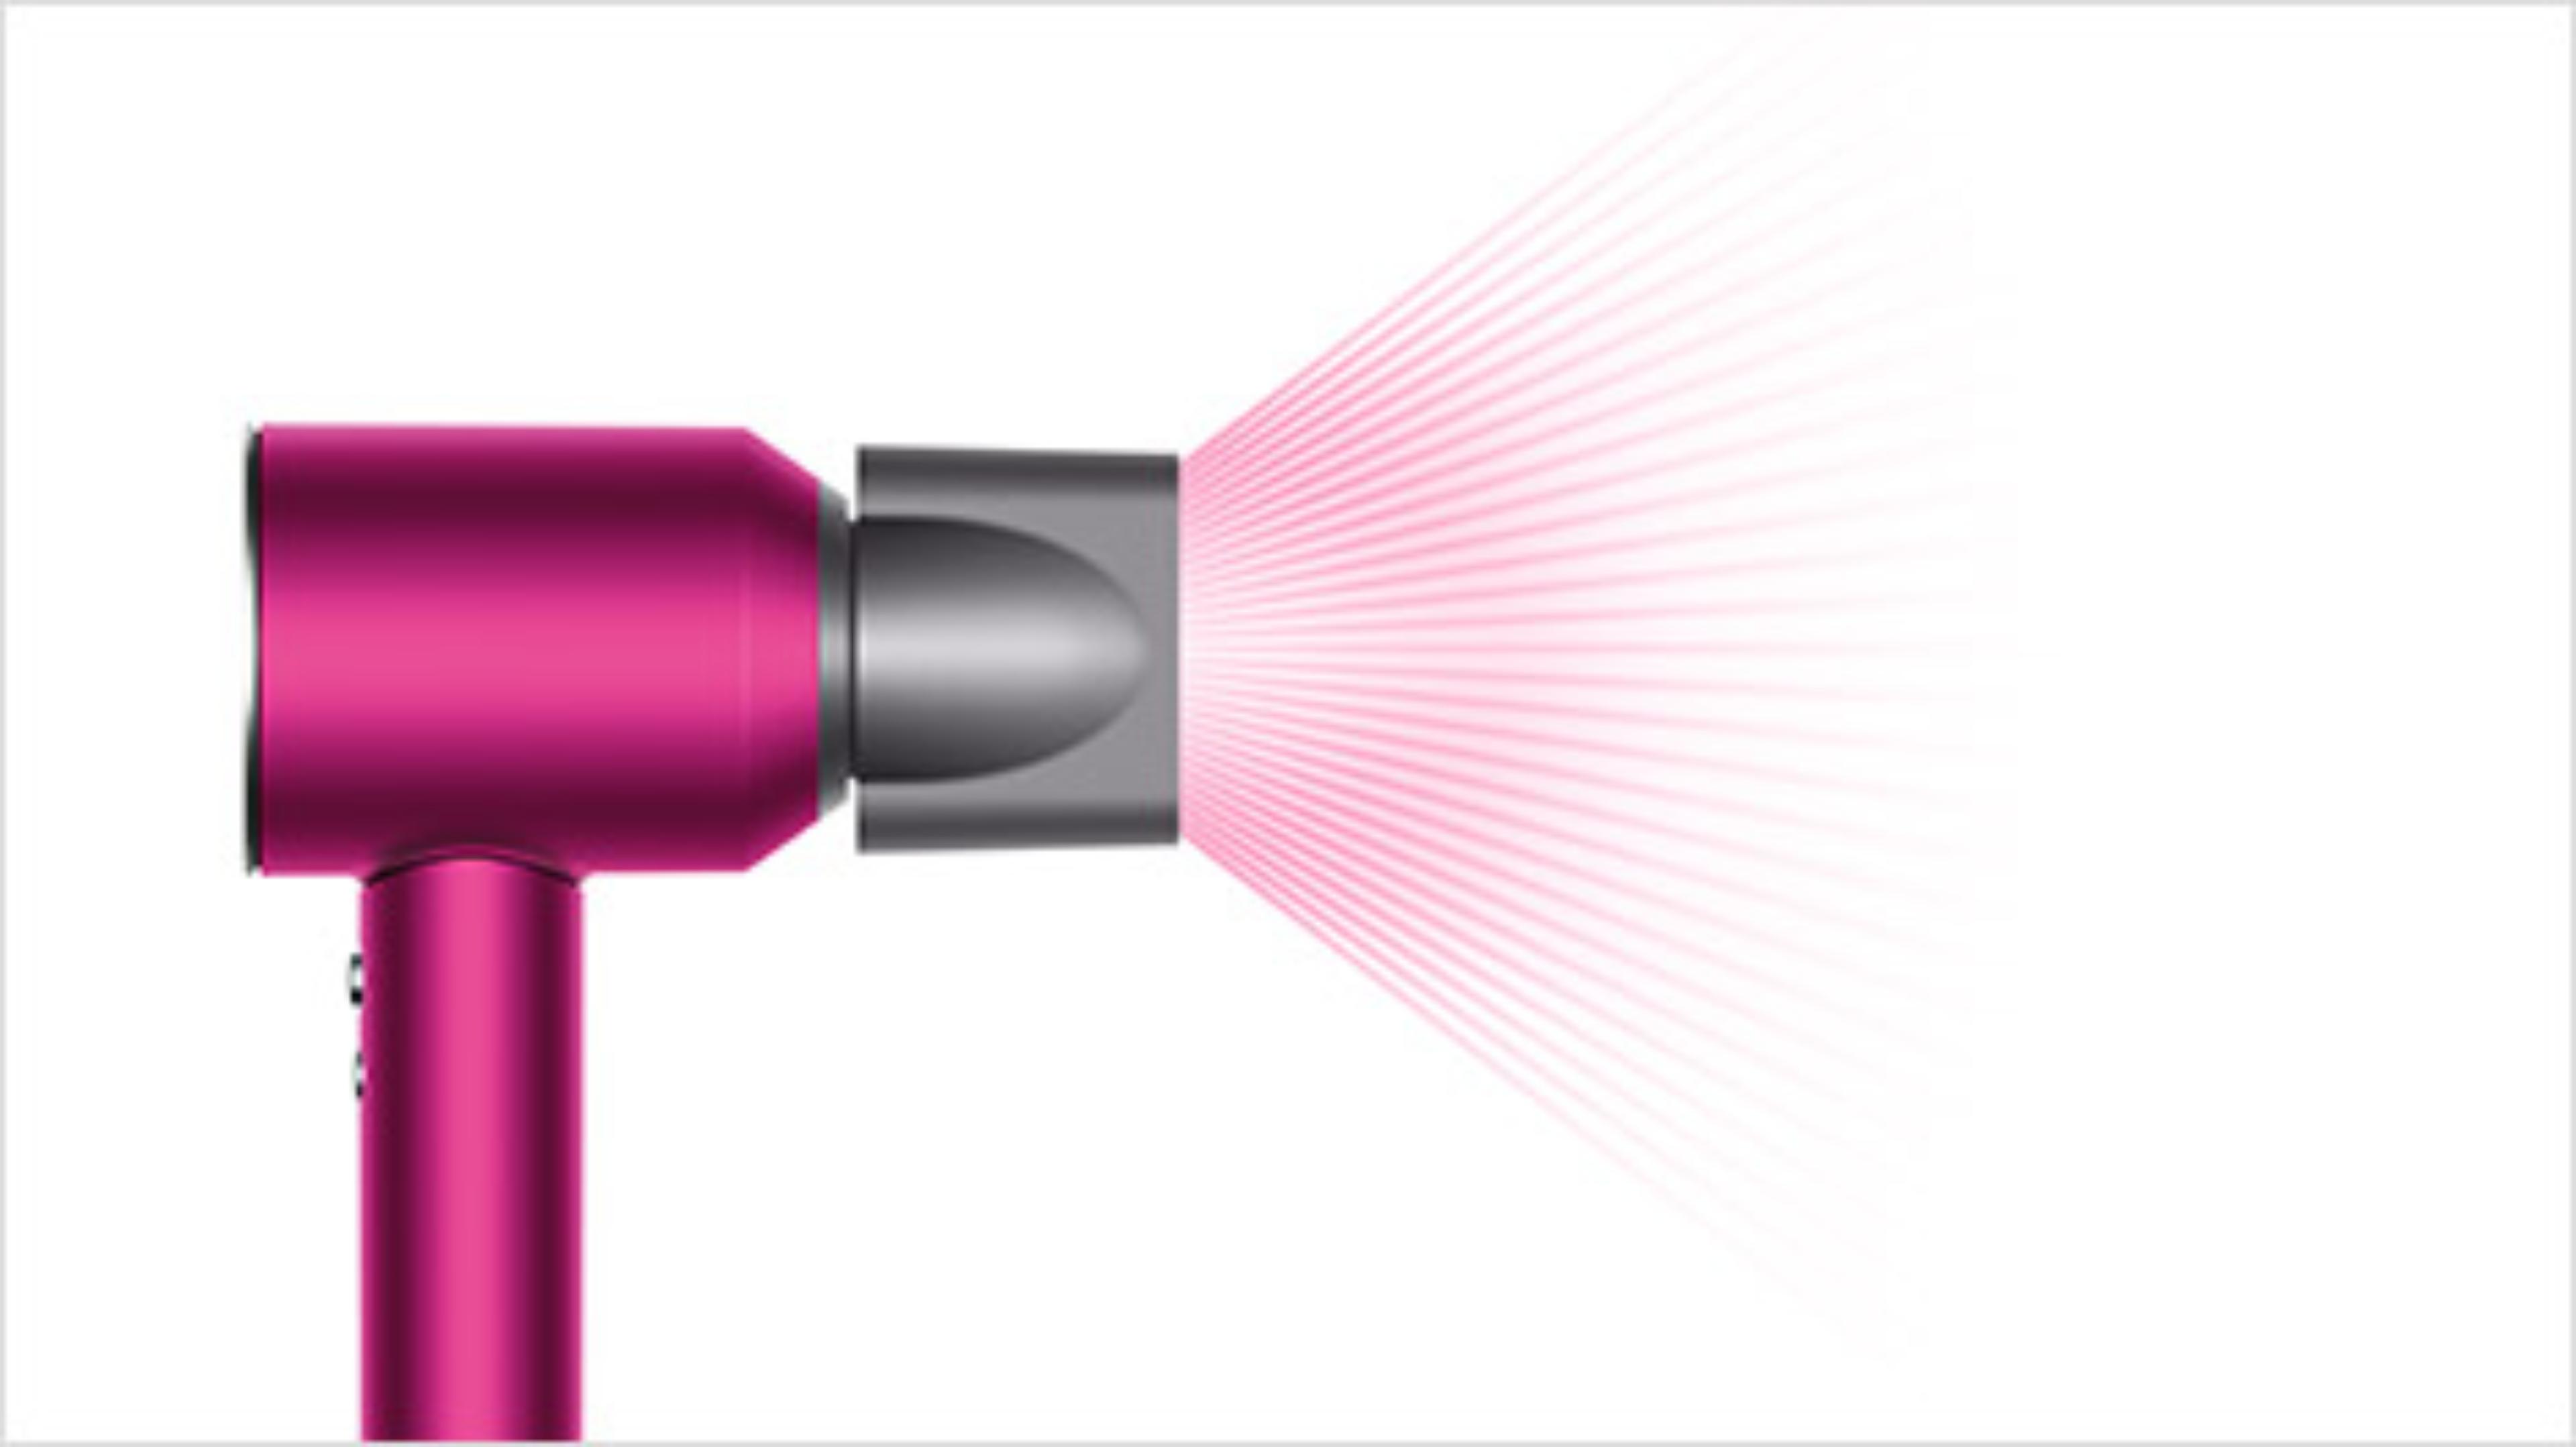 Dyson Supersonic with smoothing nozzle